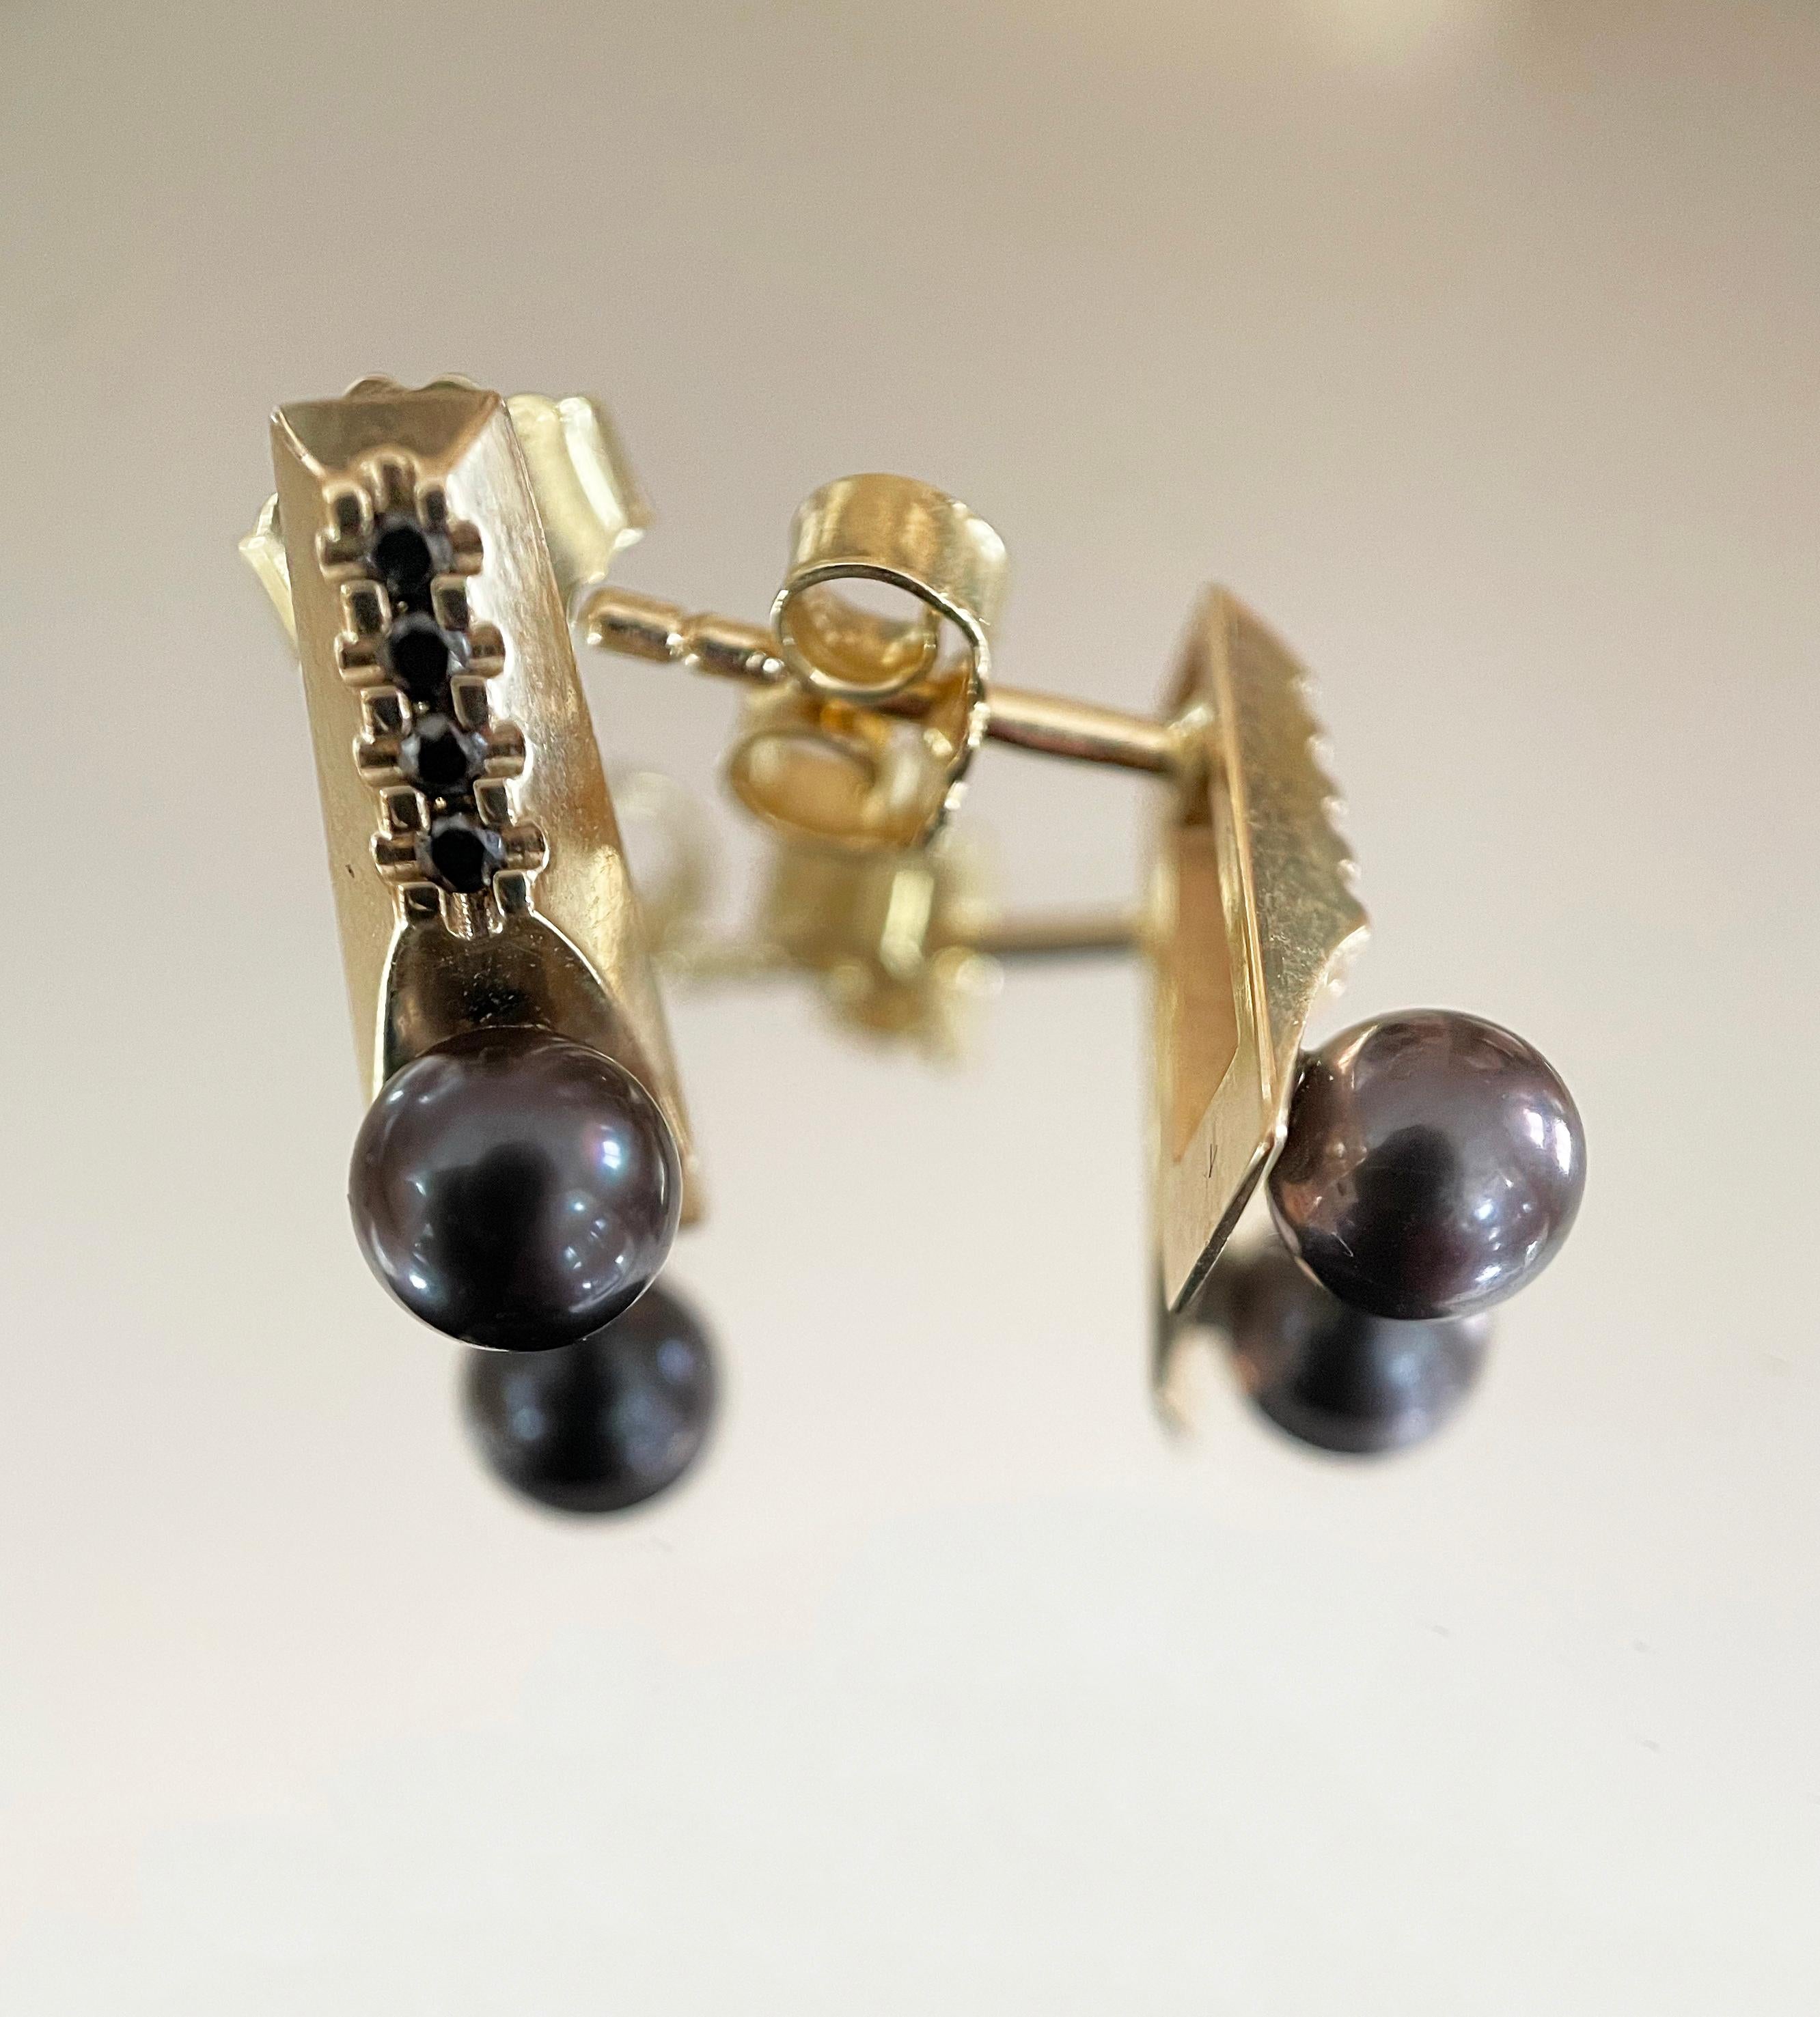 14-Karat Gold Earrings with 8 Diamonds and Black Pearls For Sale 2